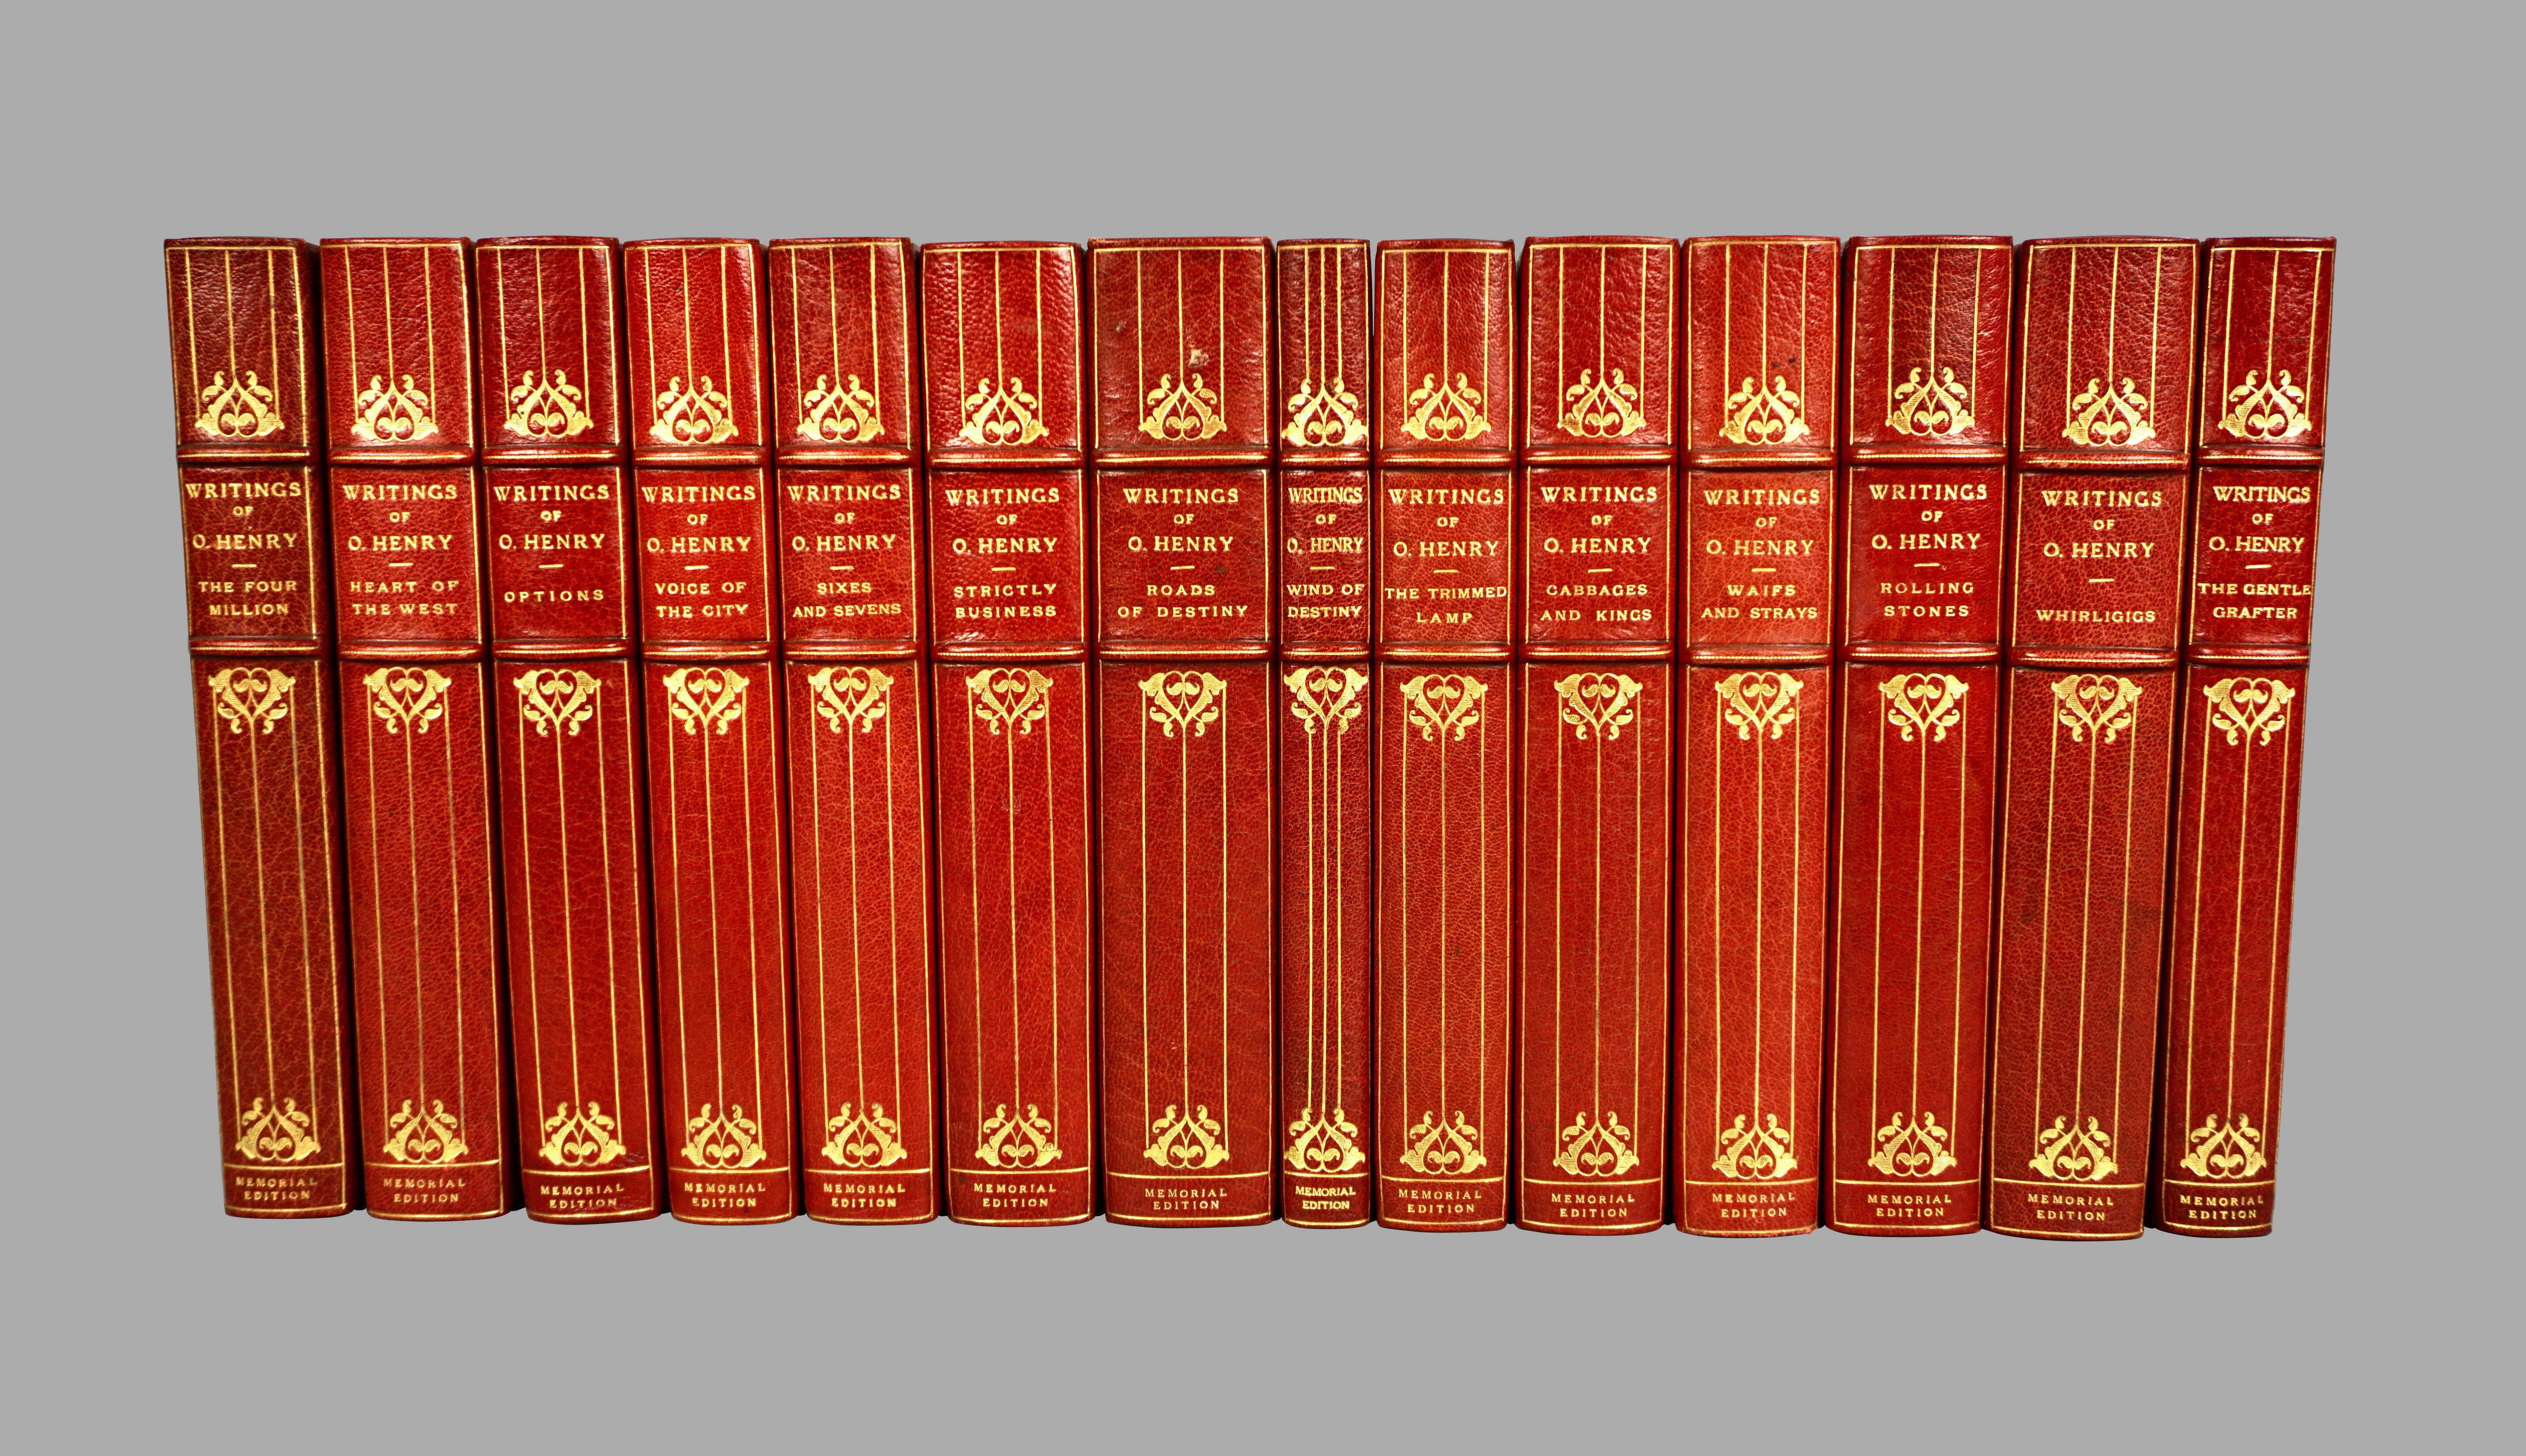 A very fine leather bound set of the complete writings of O. Henry in 14 red morocco 3/4 morocco and cloth boards with raised bands, gilt-panelled spines, the top edges gilt and illustrations by Gordon Grant. This lovely set was originally purchased